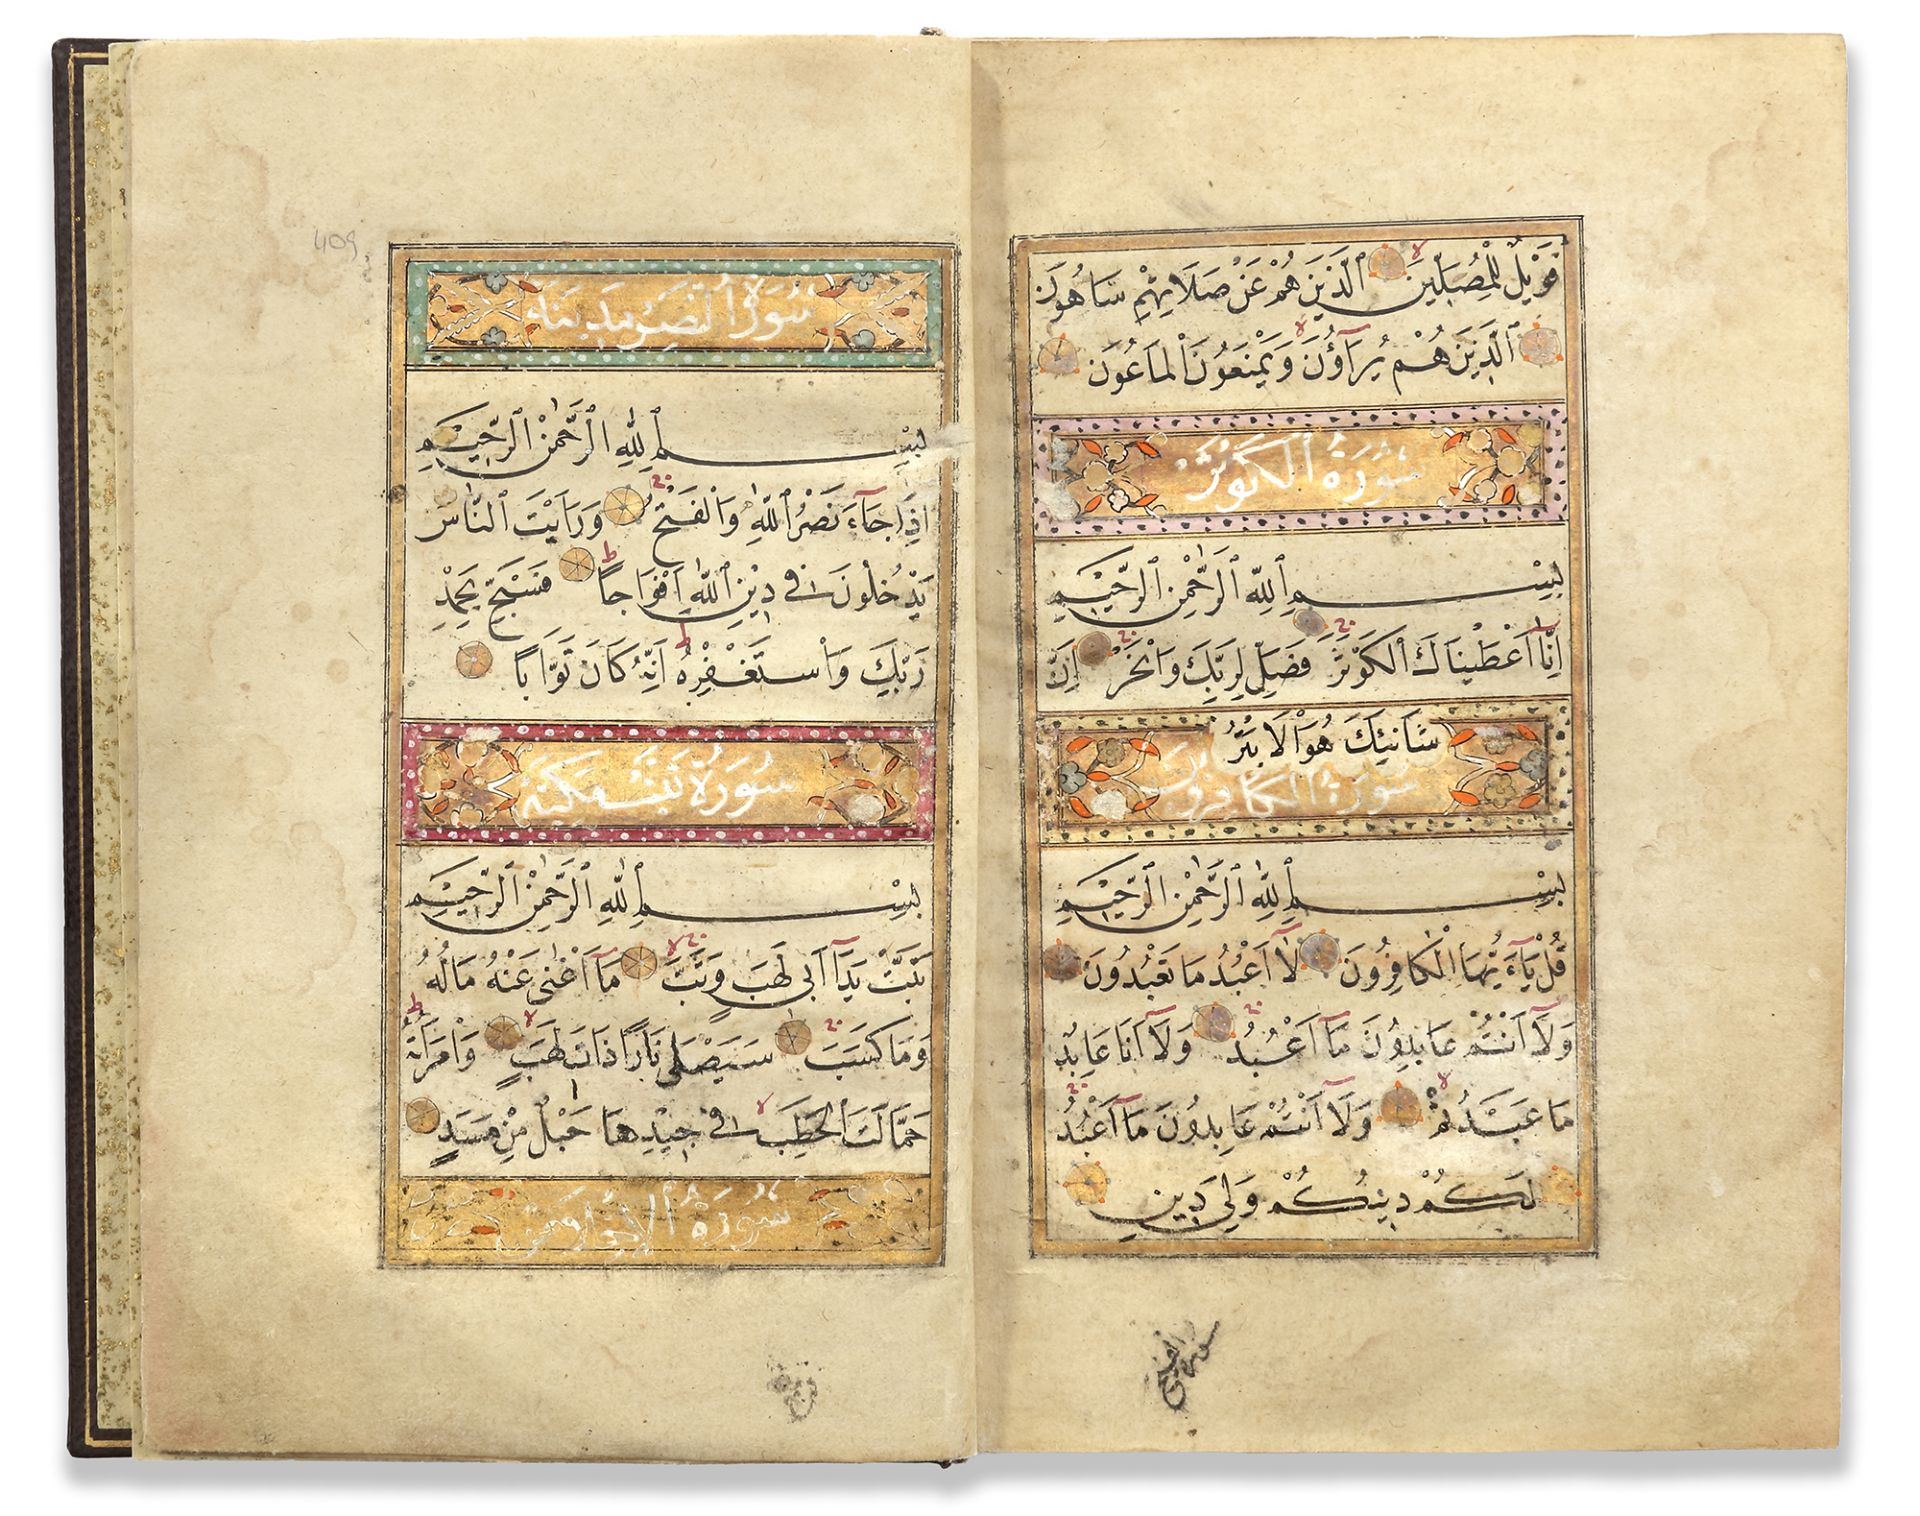 AN ILLUMINATED OTTOMAN QURAN SIGNED BY AHMED STUDENT OF HAFIZ OSMAN, 18TH CENTURY - Image 4 of 7